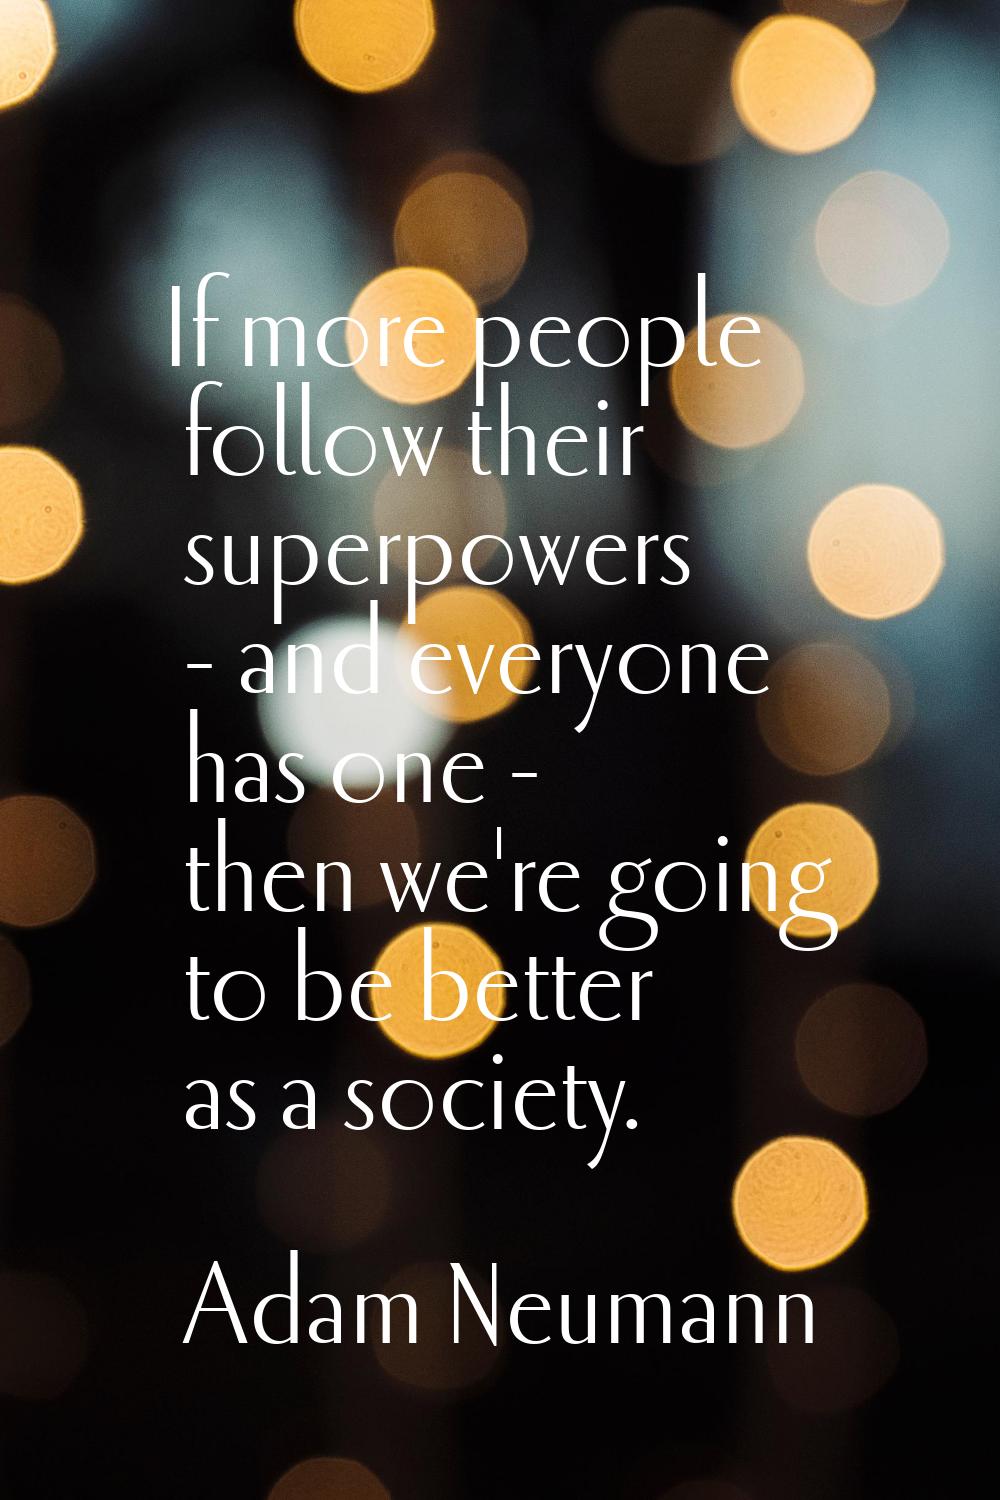 If more people follow their superpowers - and everyone has one - then we're going to be better as a